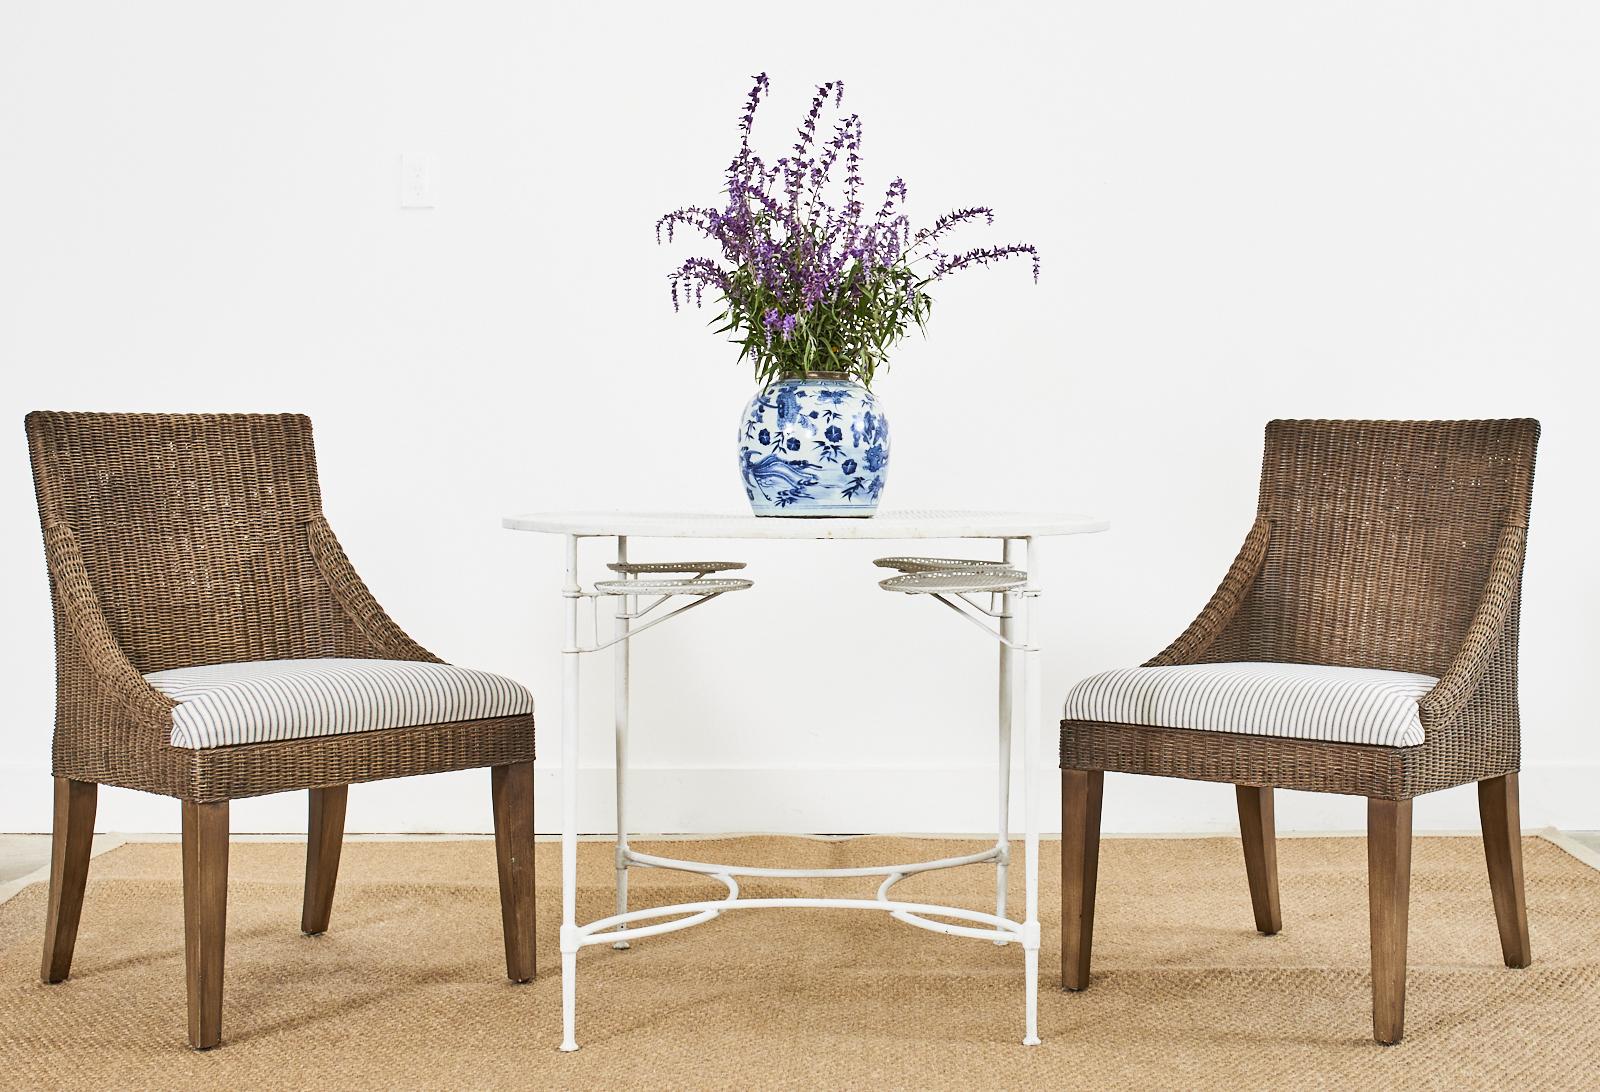 California organic modern coastal style set of eight dining chairs by Palecek. The chairs feature a hardwood frame covered with hand-woven natural rattan peel wicker. The chairs have gracefully curved sides that conjoin to a generous seat newly